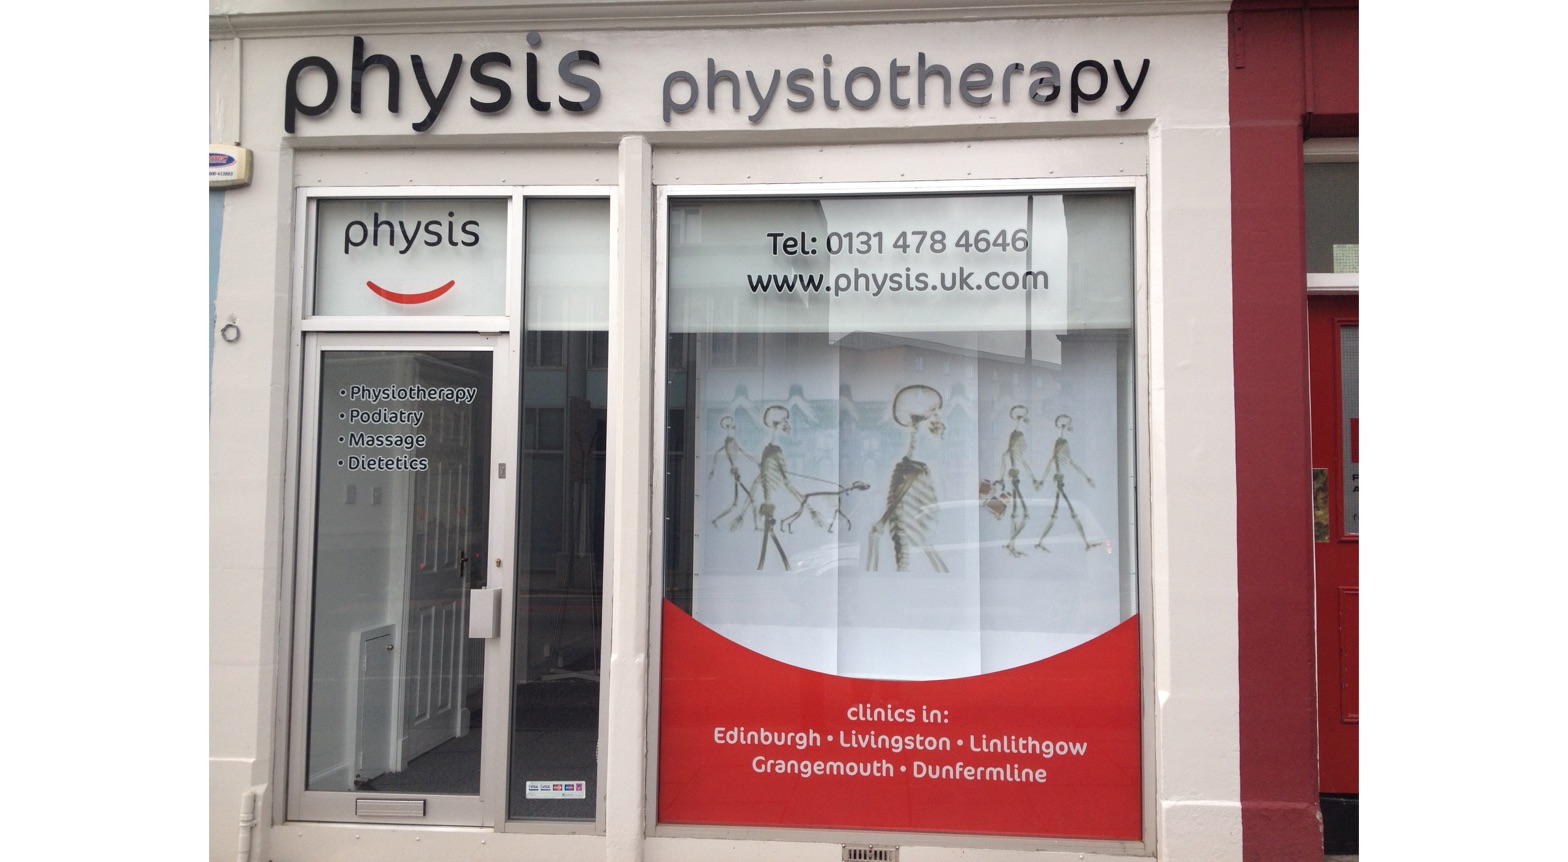 physiotherapy morrison street, physiotherapist, physiotherapy, Edinburgh physio, physis, scotland